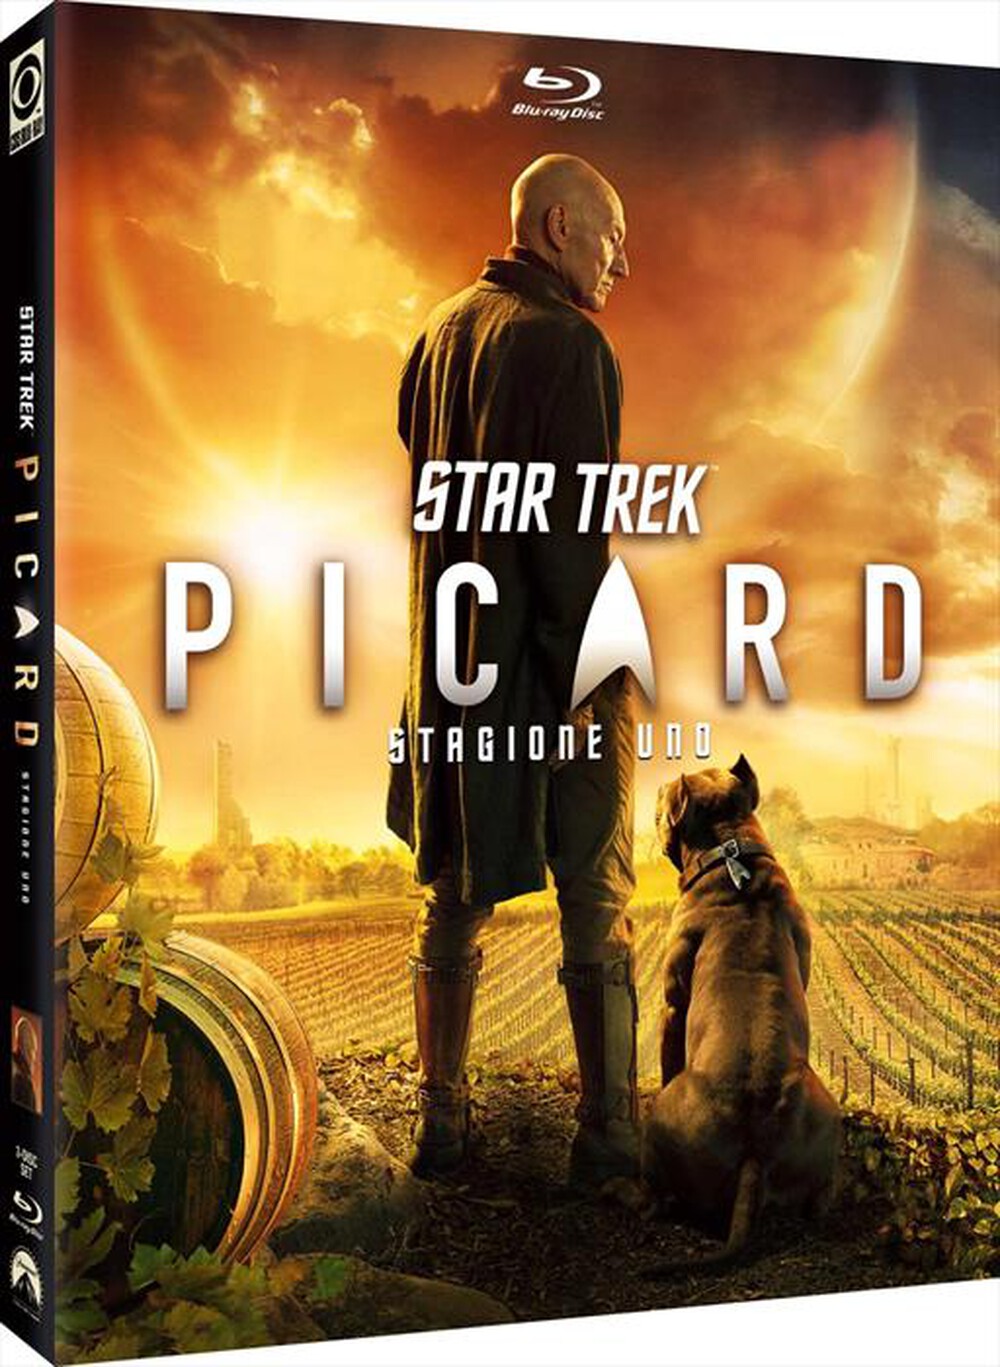 "Paramount Pictures - Star Trek: Picard - Stagione 01 (3 Blu-Ray)"